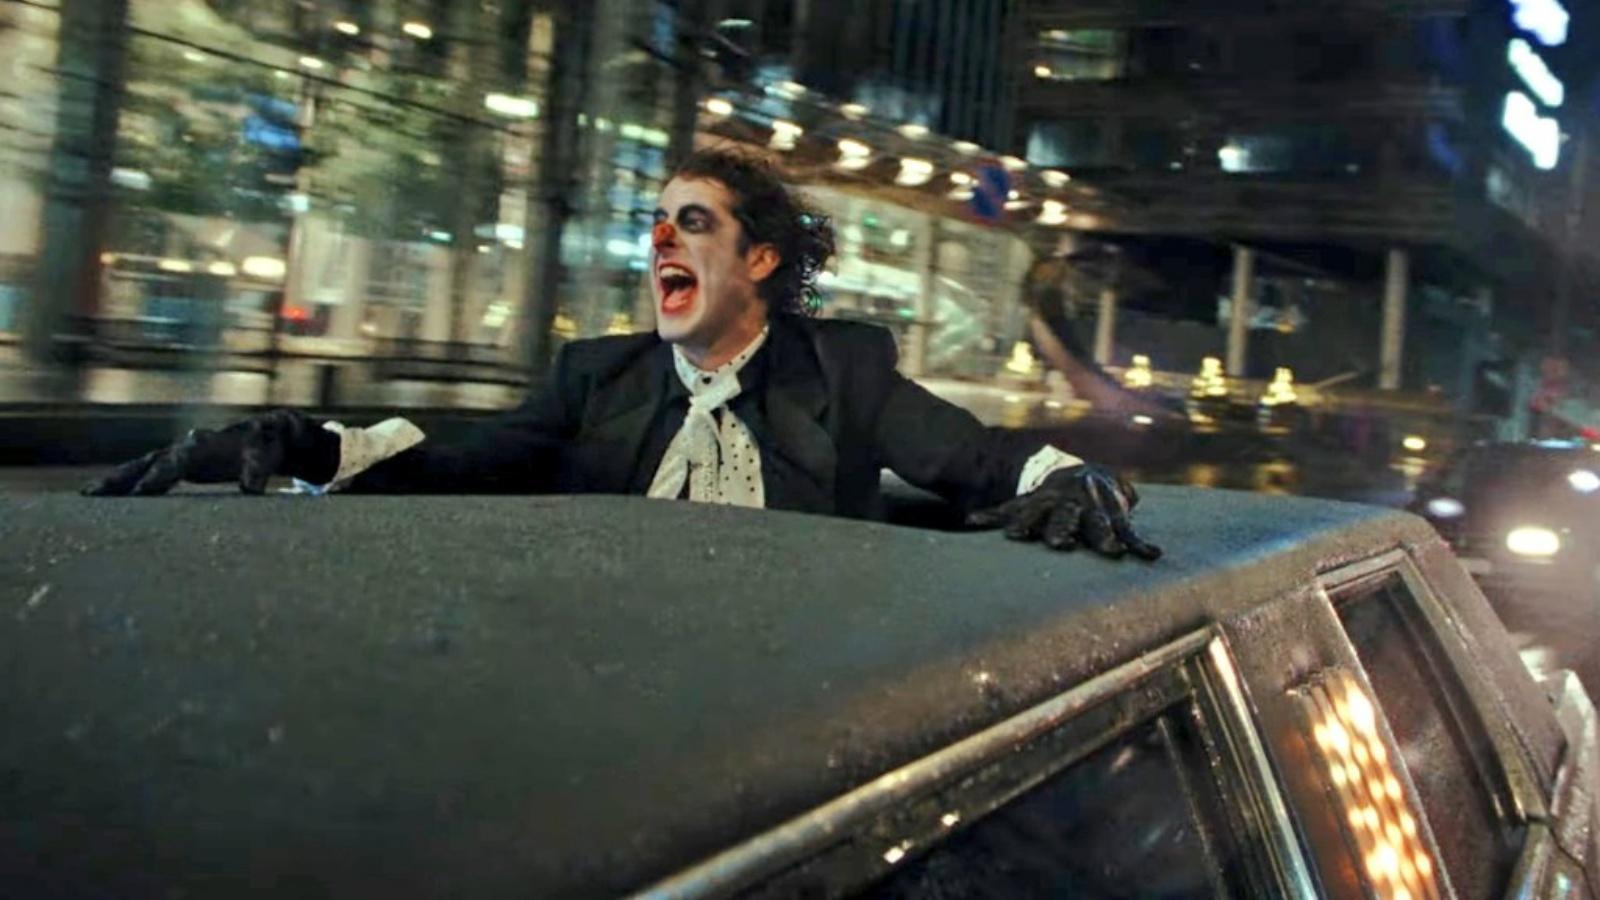 Lil Dicky dressed up like the Joker hanging out of a limo rooftop